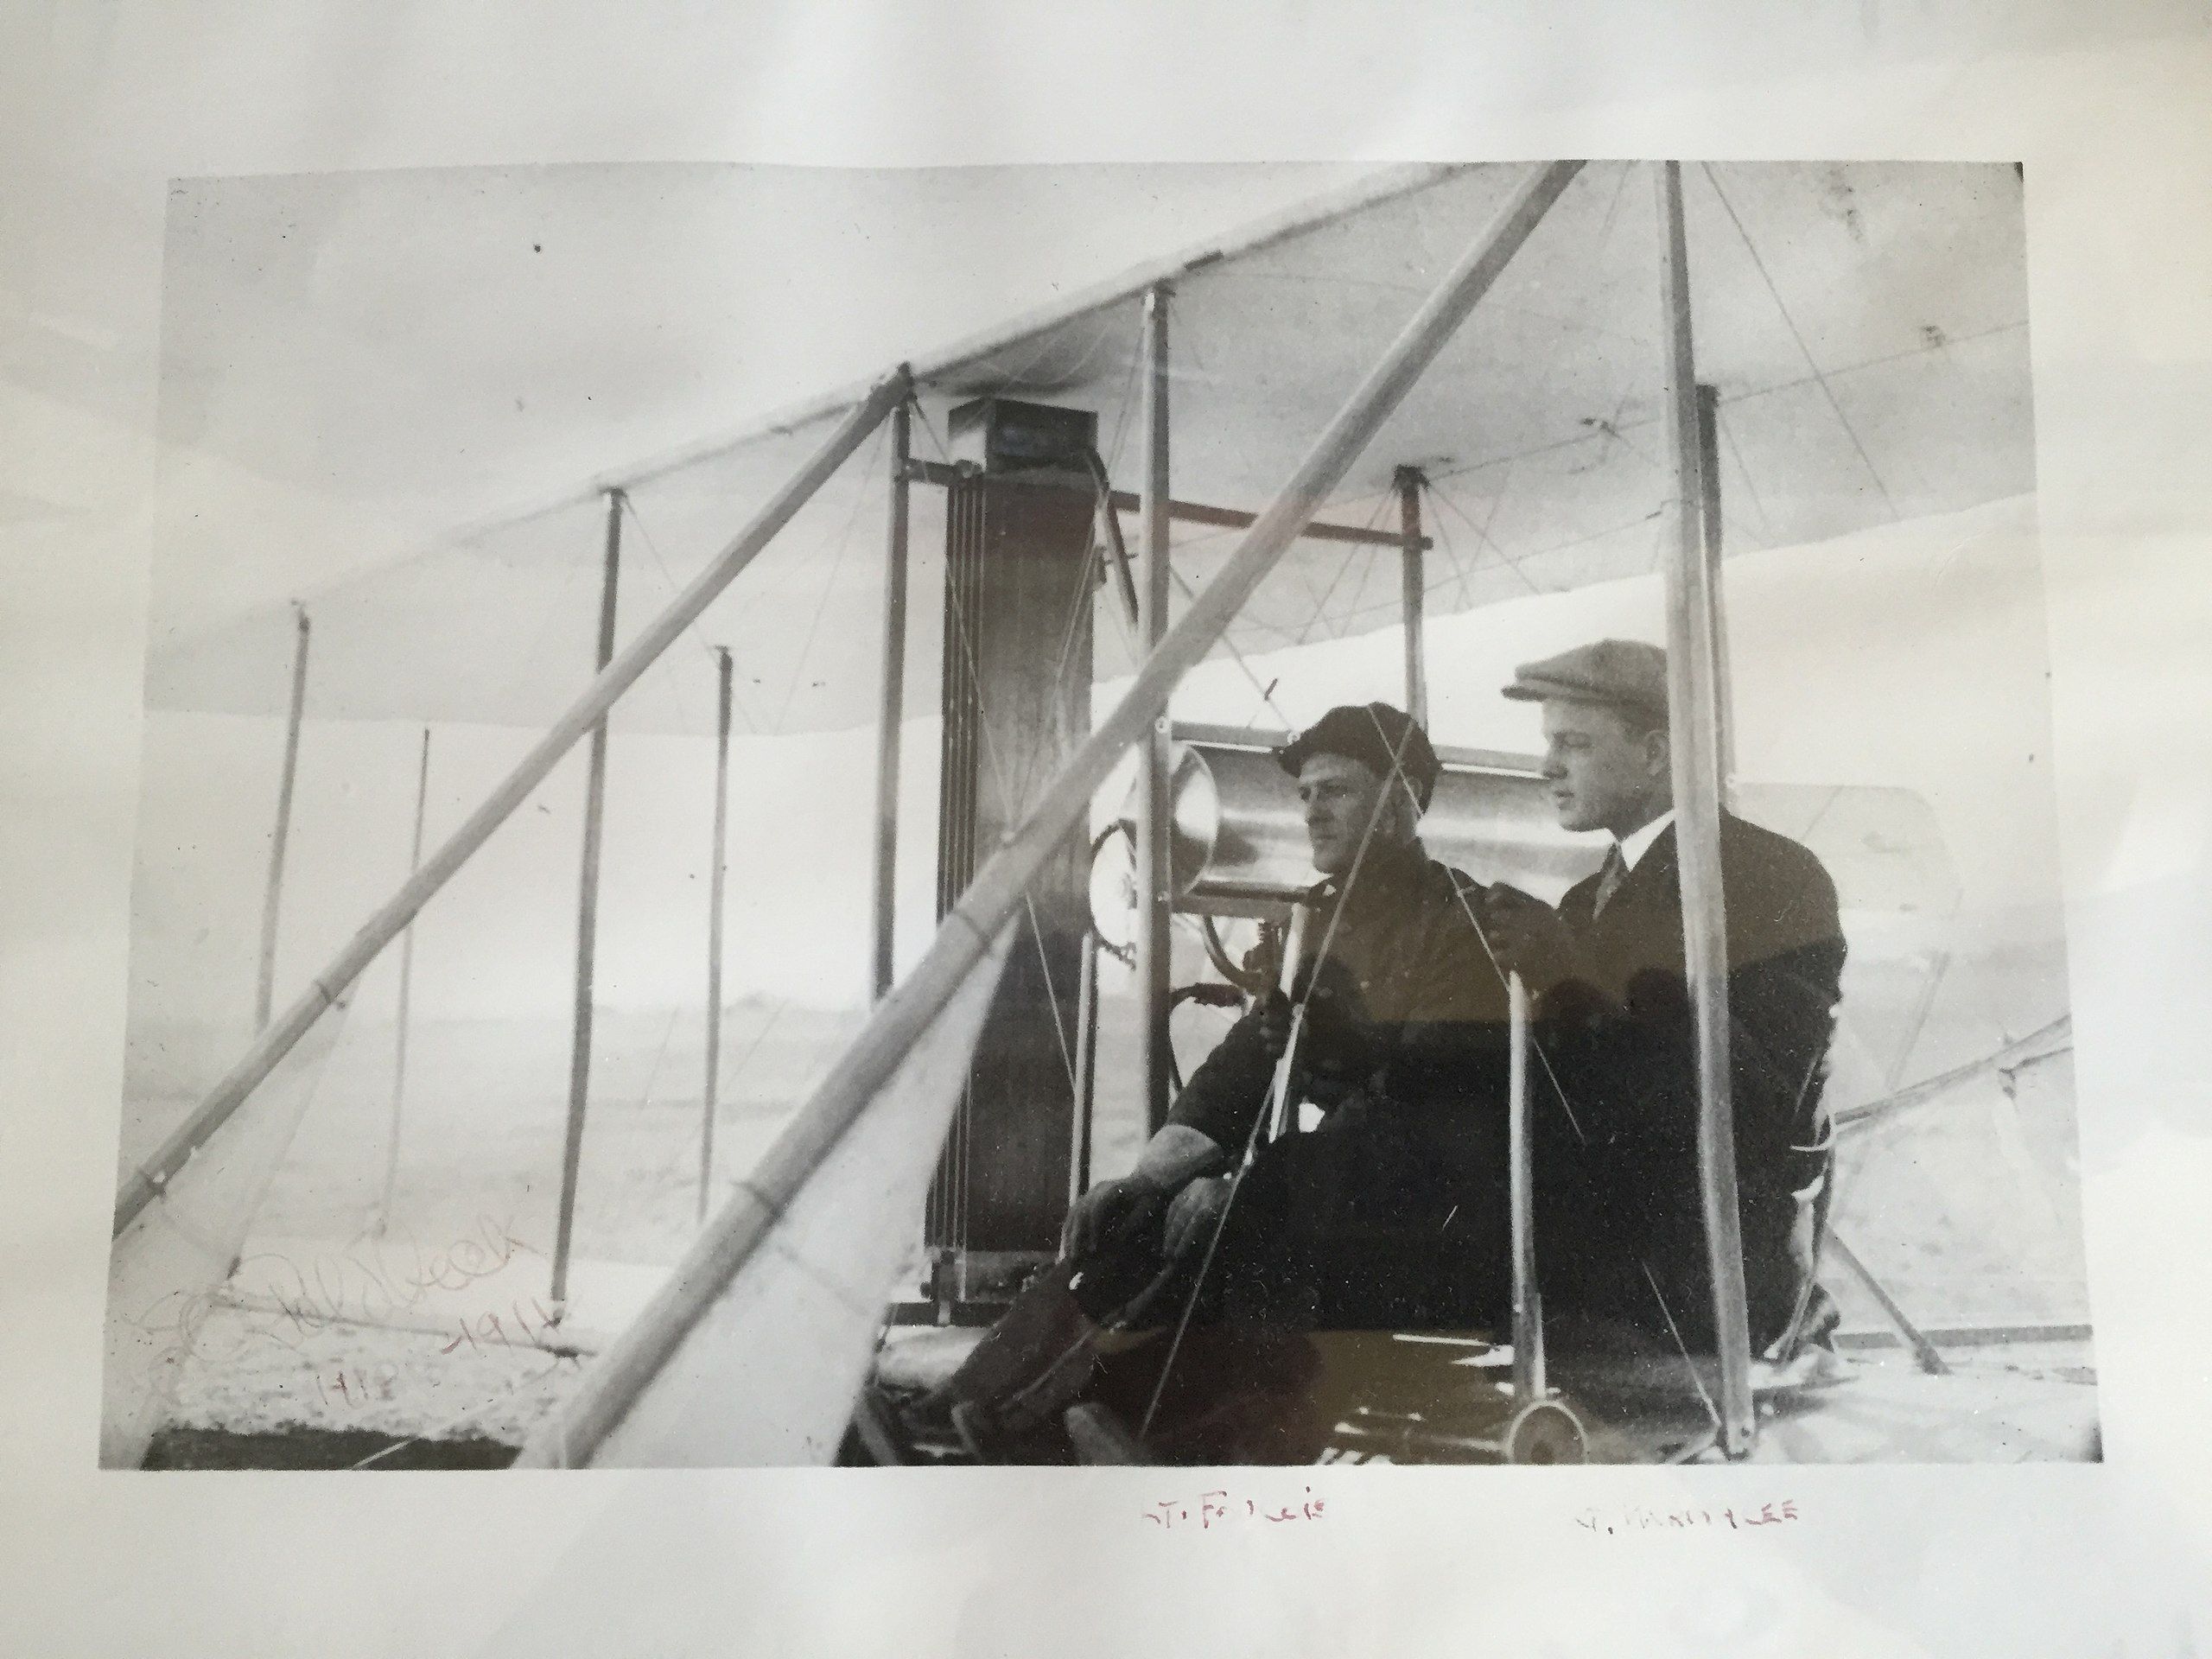 Benjamin Foulois and Philip Parmelee flying an early Wright model aircraft. 